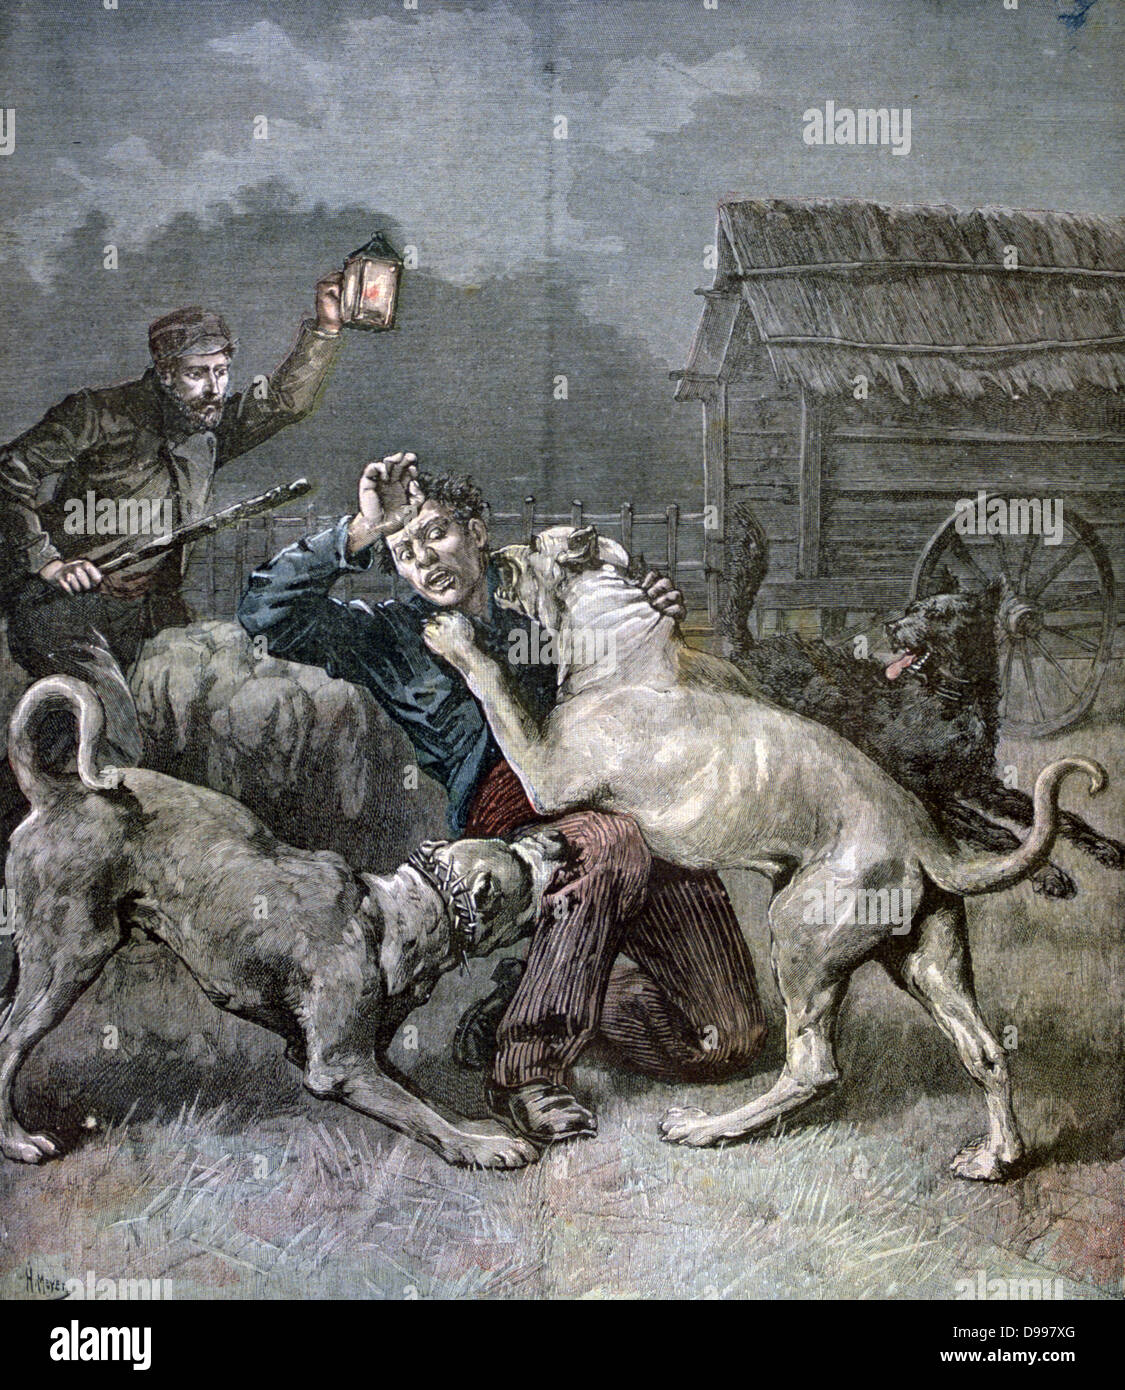 Shepherd, disturbed by noise at night, finds a criminal being attacked and killed by the three large dogs guarding sheep.  From 'Le Petit Journal', 21 November 1891. Stock Photo